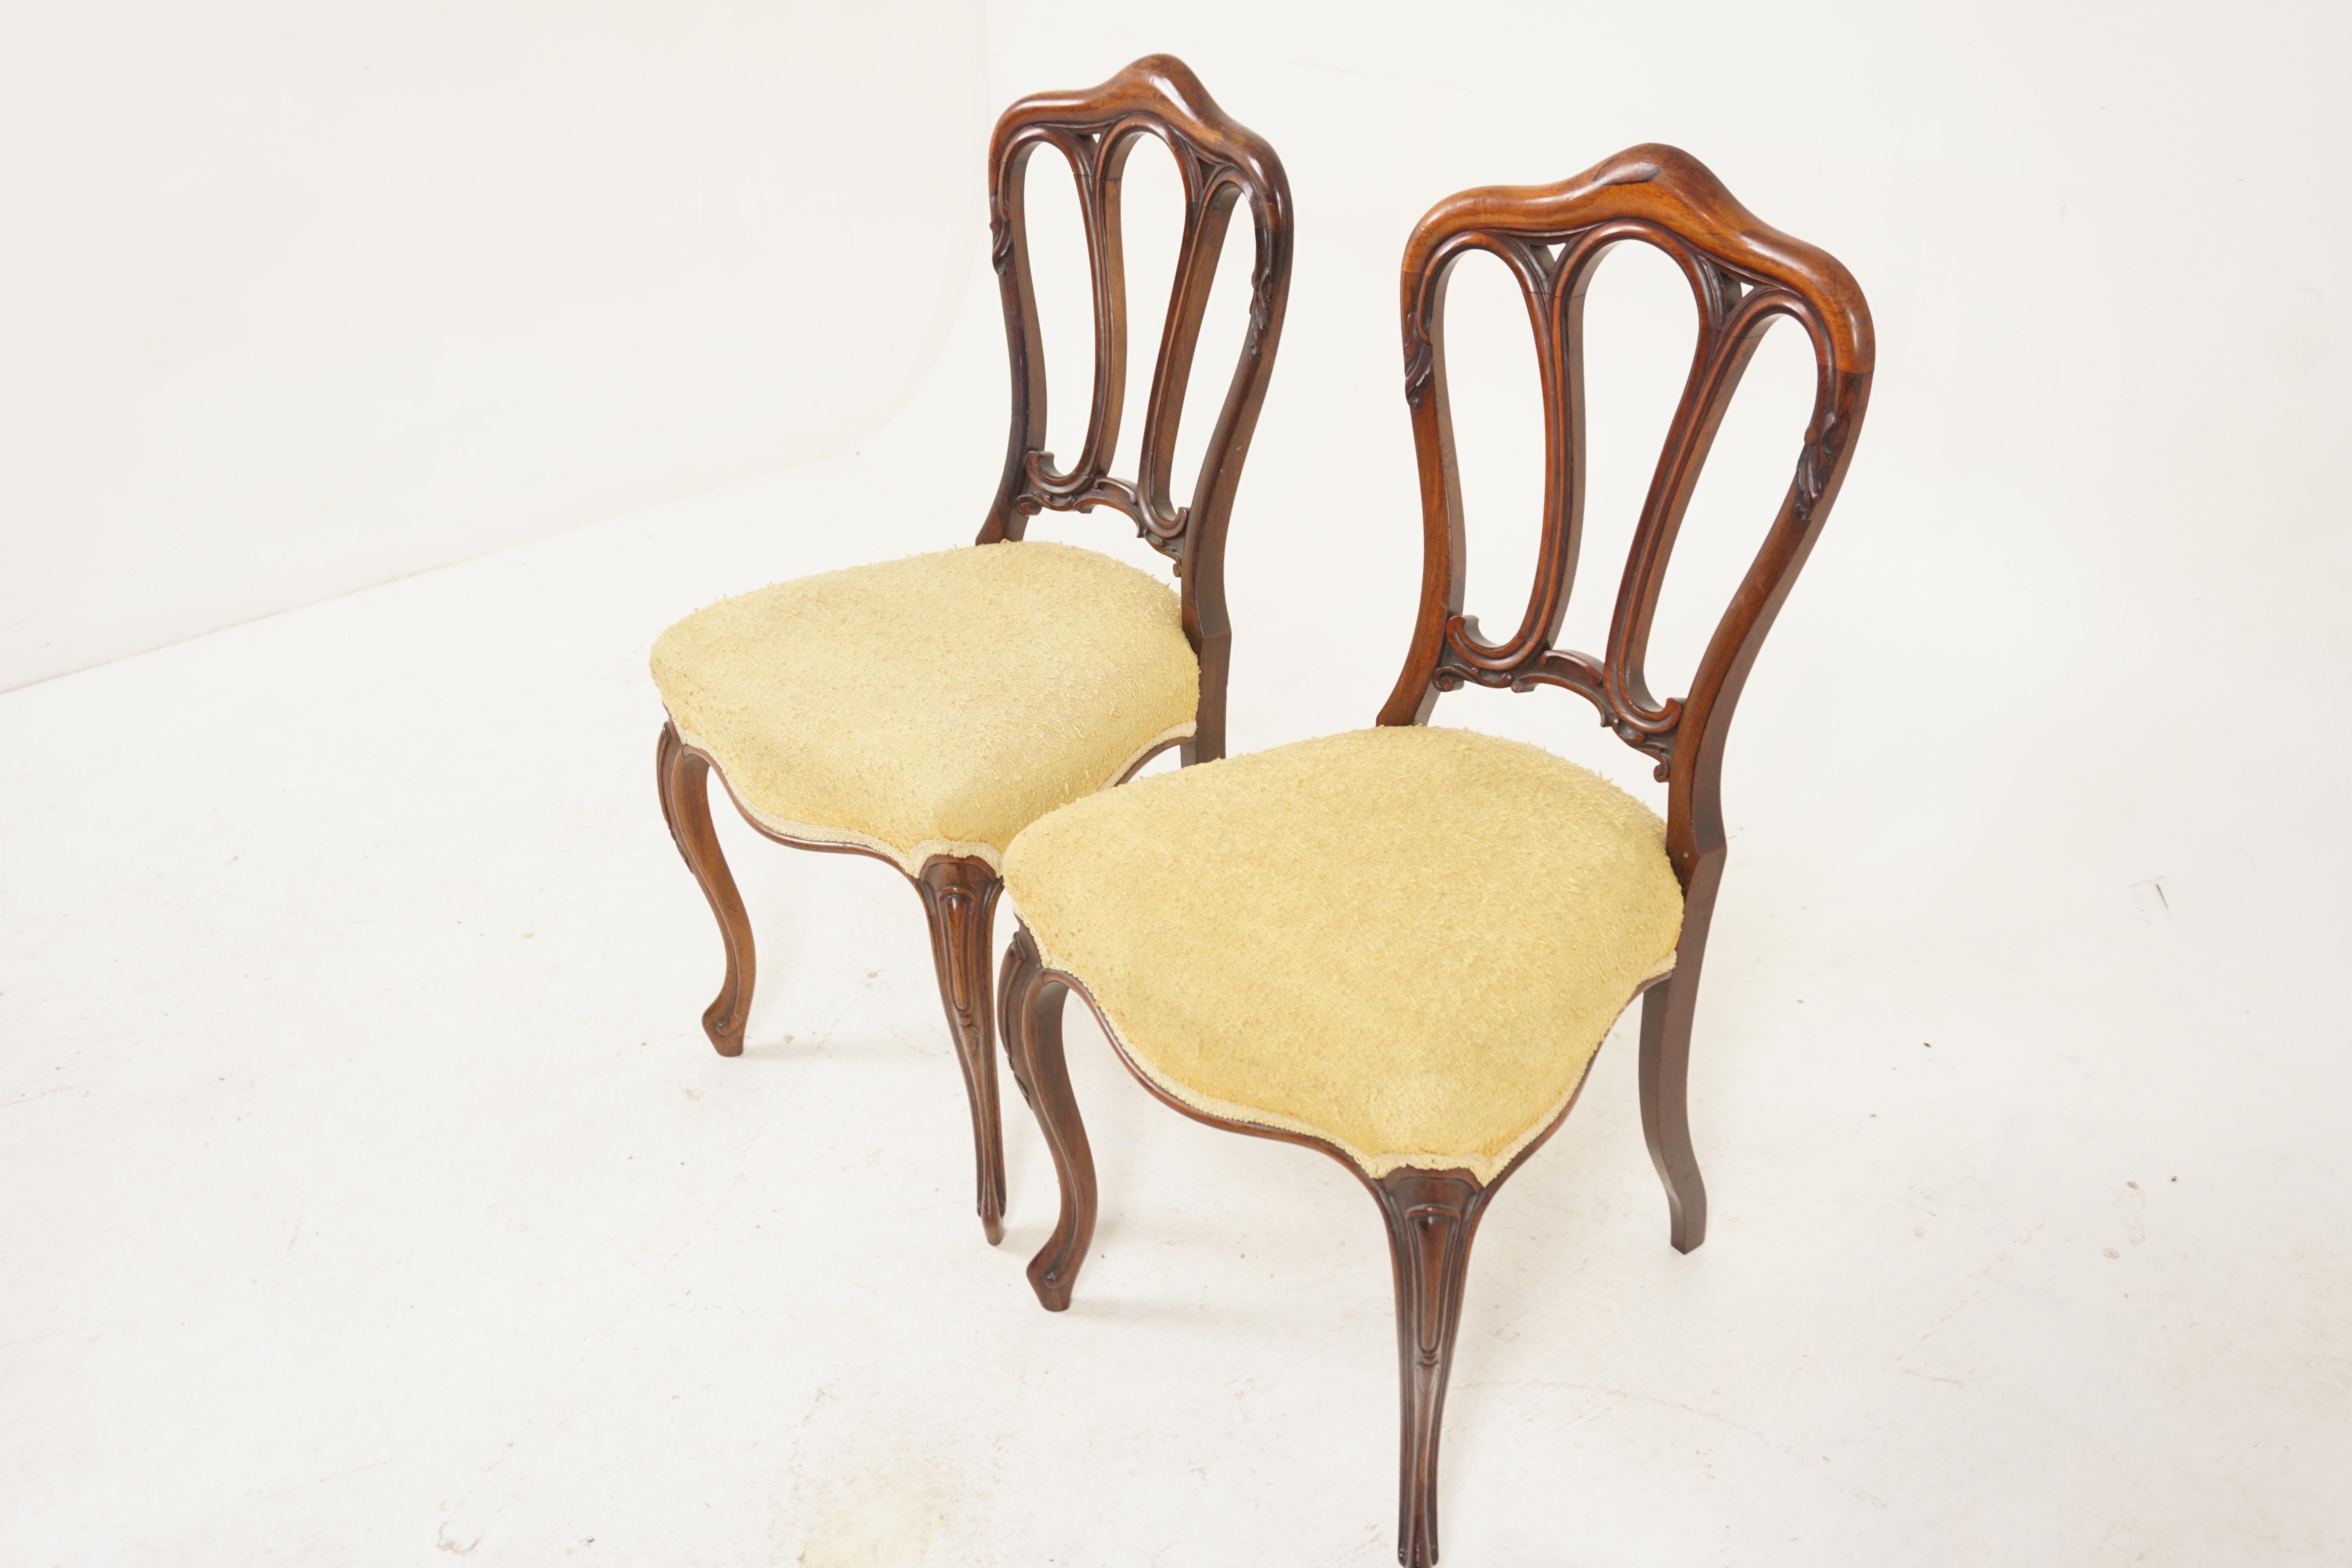 Pair of Victorian Carved Rosewood Occasional Chairs, Scotland 1860, H1165

Scotland 1860
Solid Rosewood
Original finish
The chairs have pierced, shaped and carved backs
Large upholstered overstuffed seats
All standing on cabriole supports
All joints